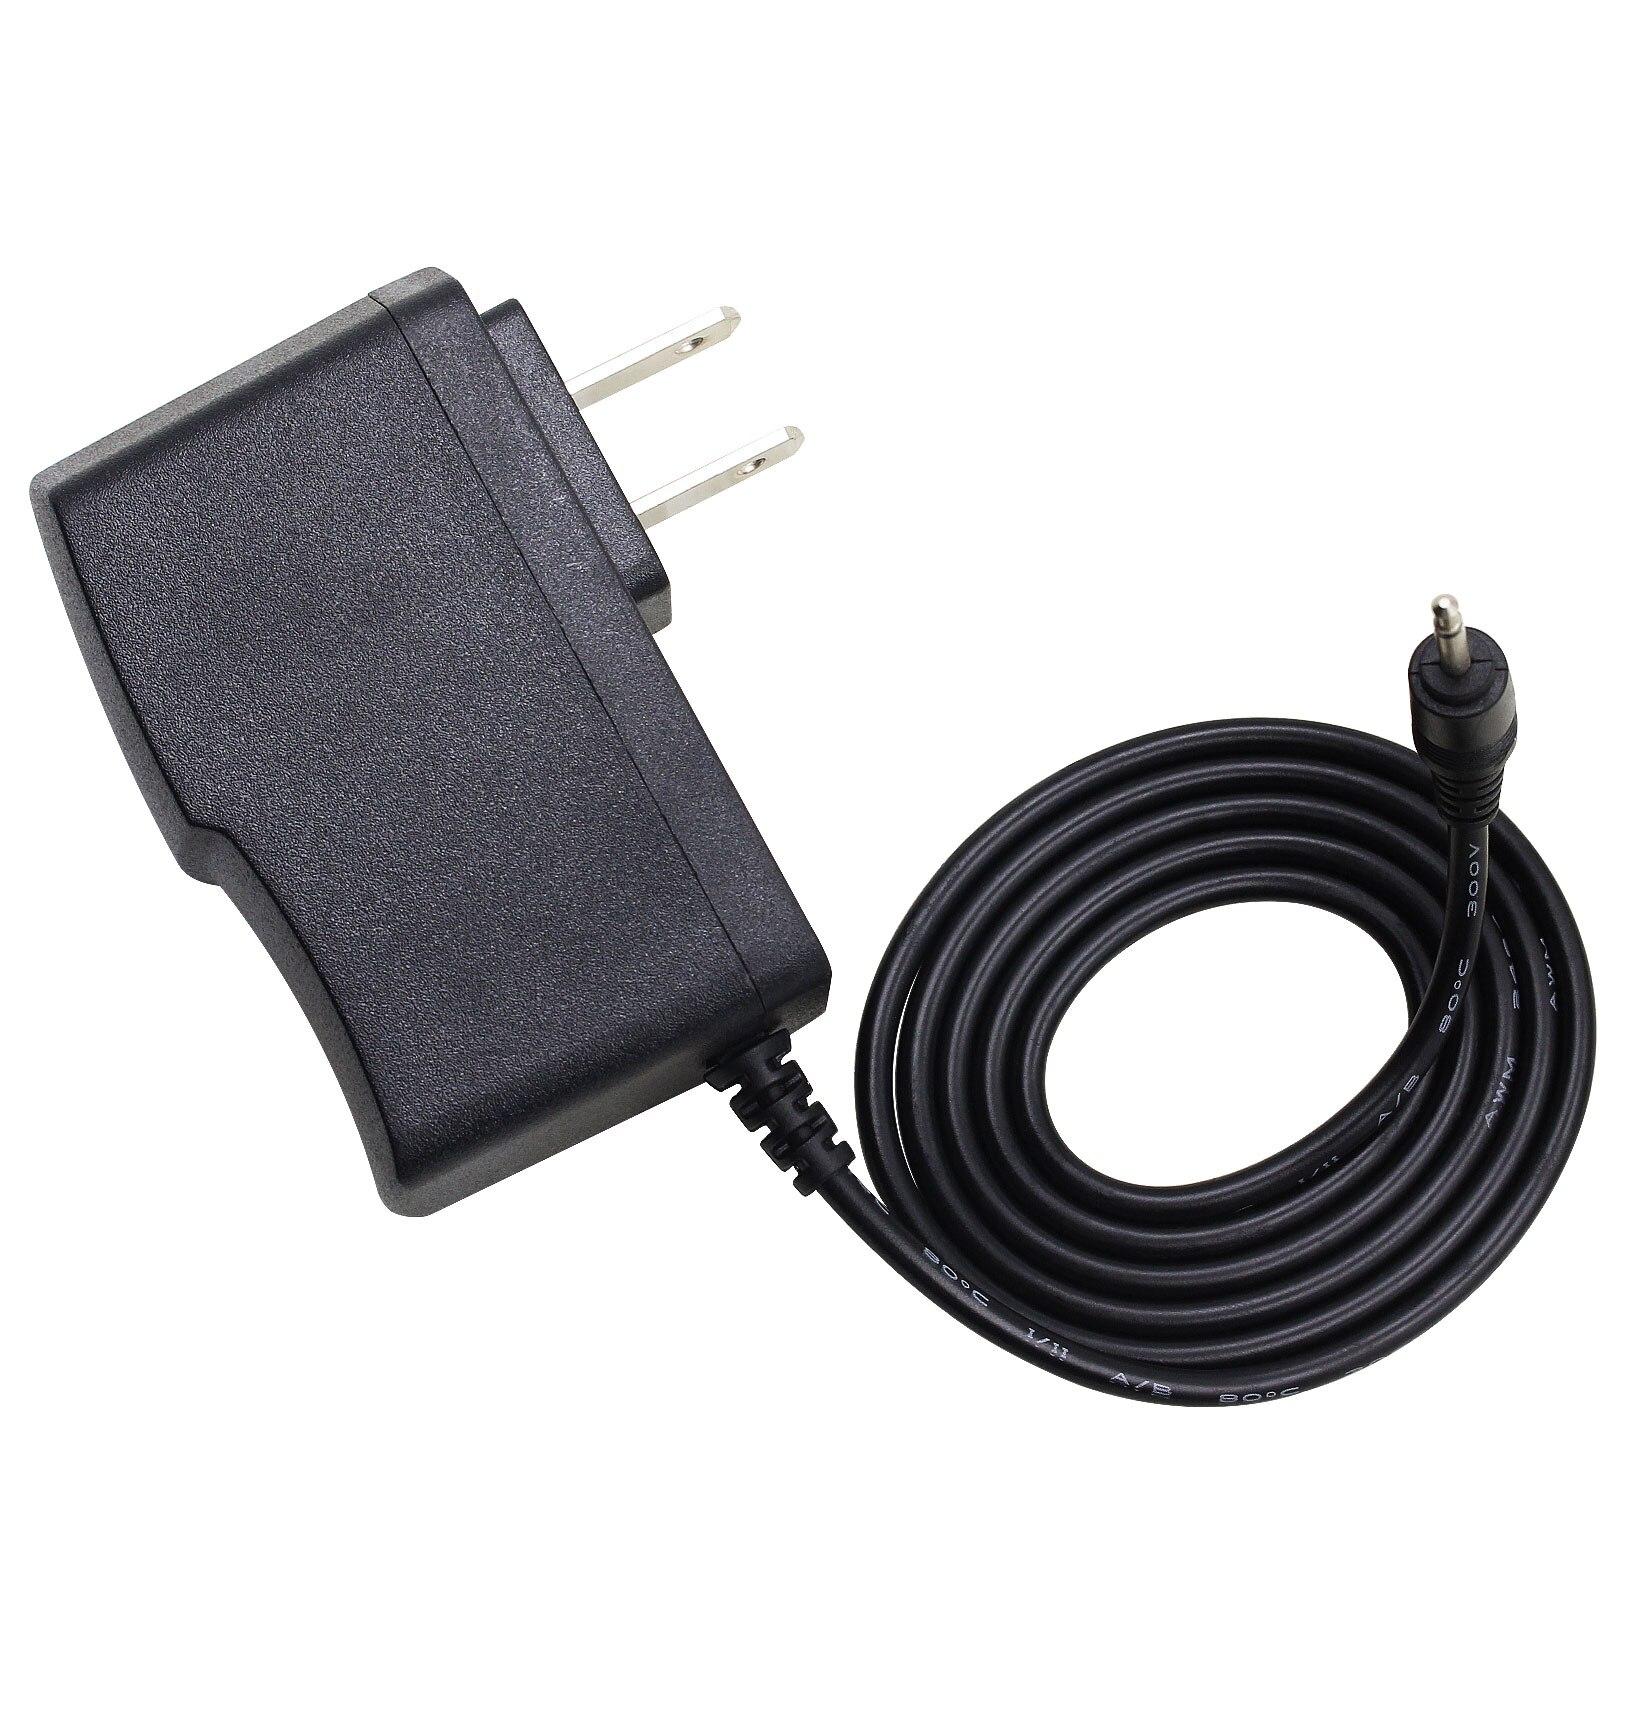 USB Power Adapter Charger Cable Cord For Blissful Secrets Wand Massager vibrator 